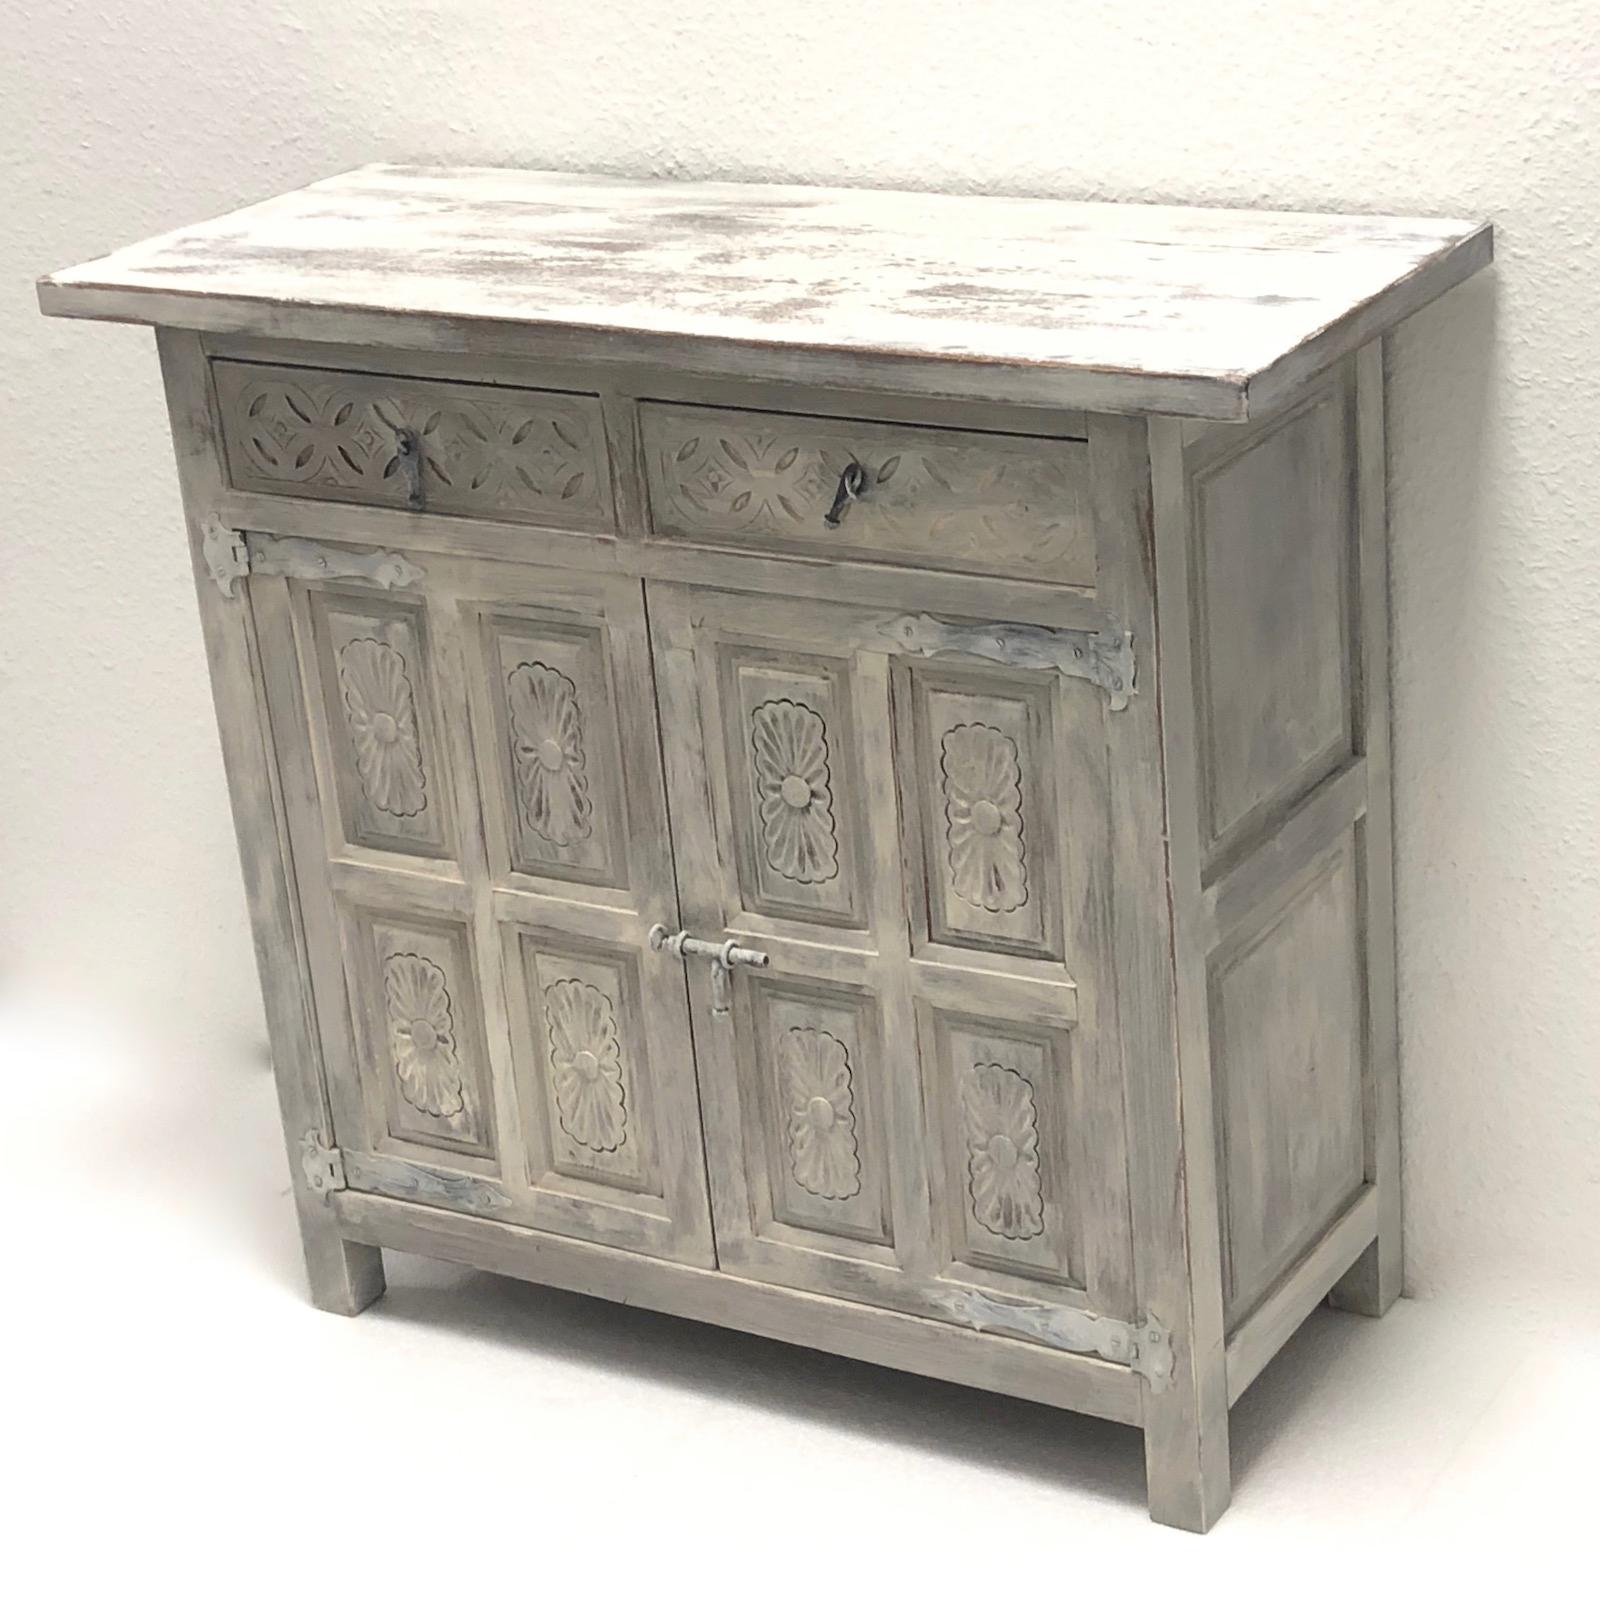 This is a beautiful credenza cabinet sideboard, circa 1960 in date and painted by an artist in white to look like the highly modern shabby chic style.
A nice addition to year entry hall or for your Swedish Farmhouse style home. Add an elegant touch